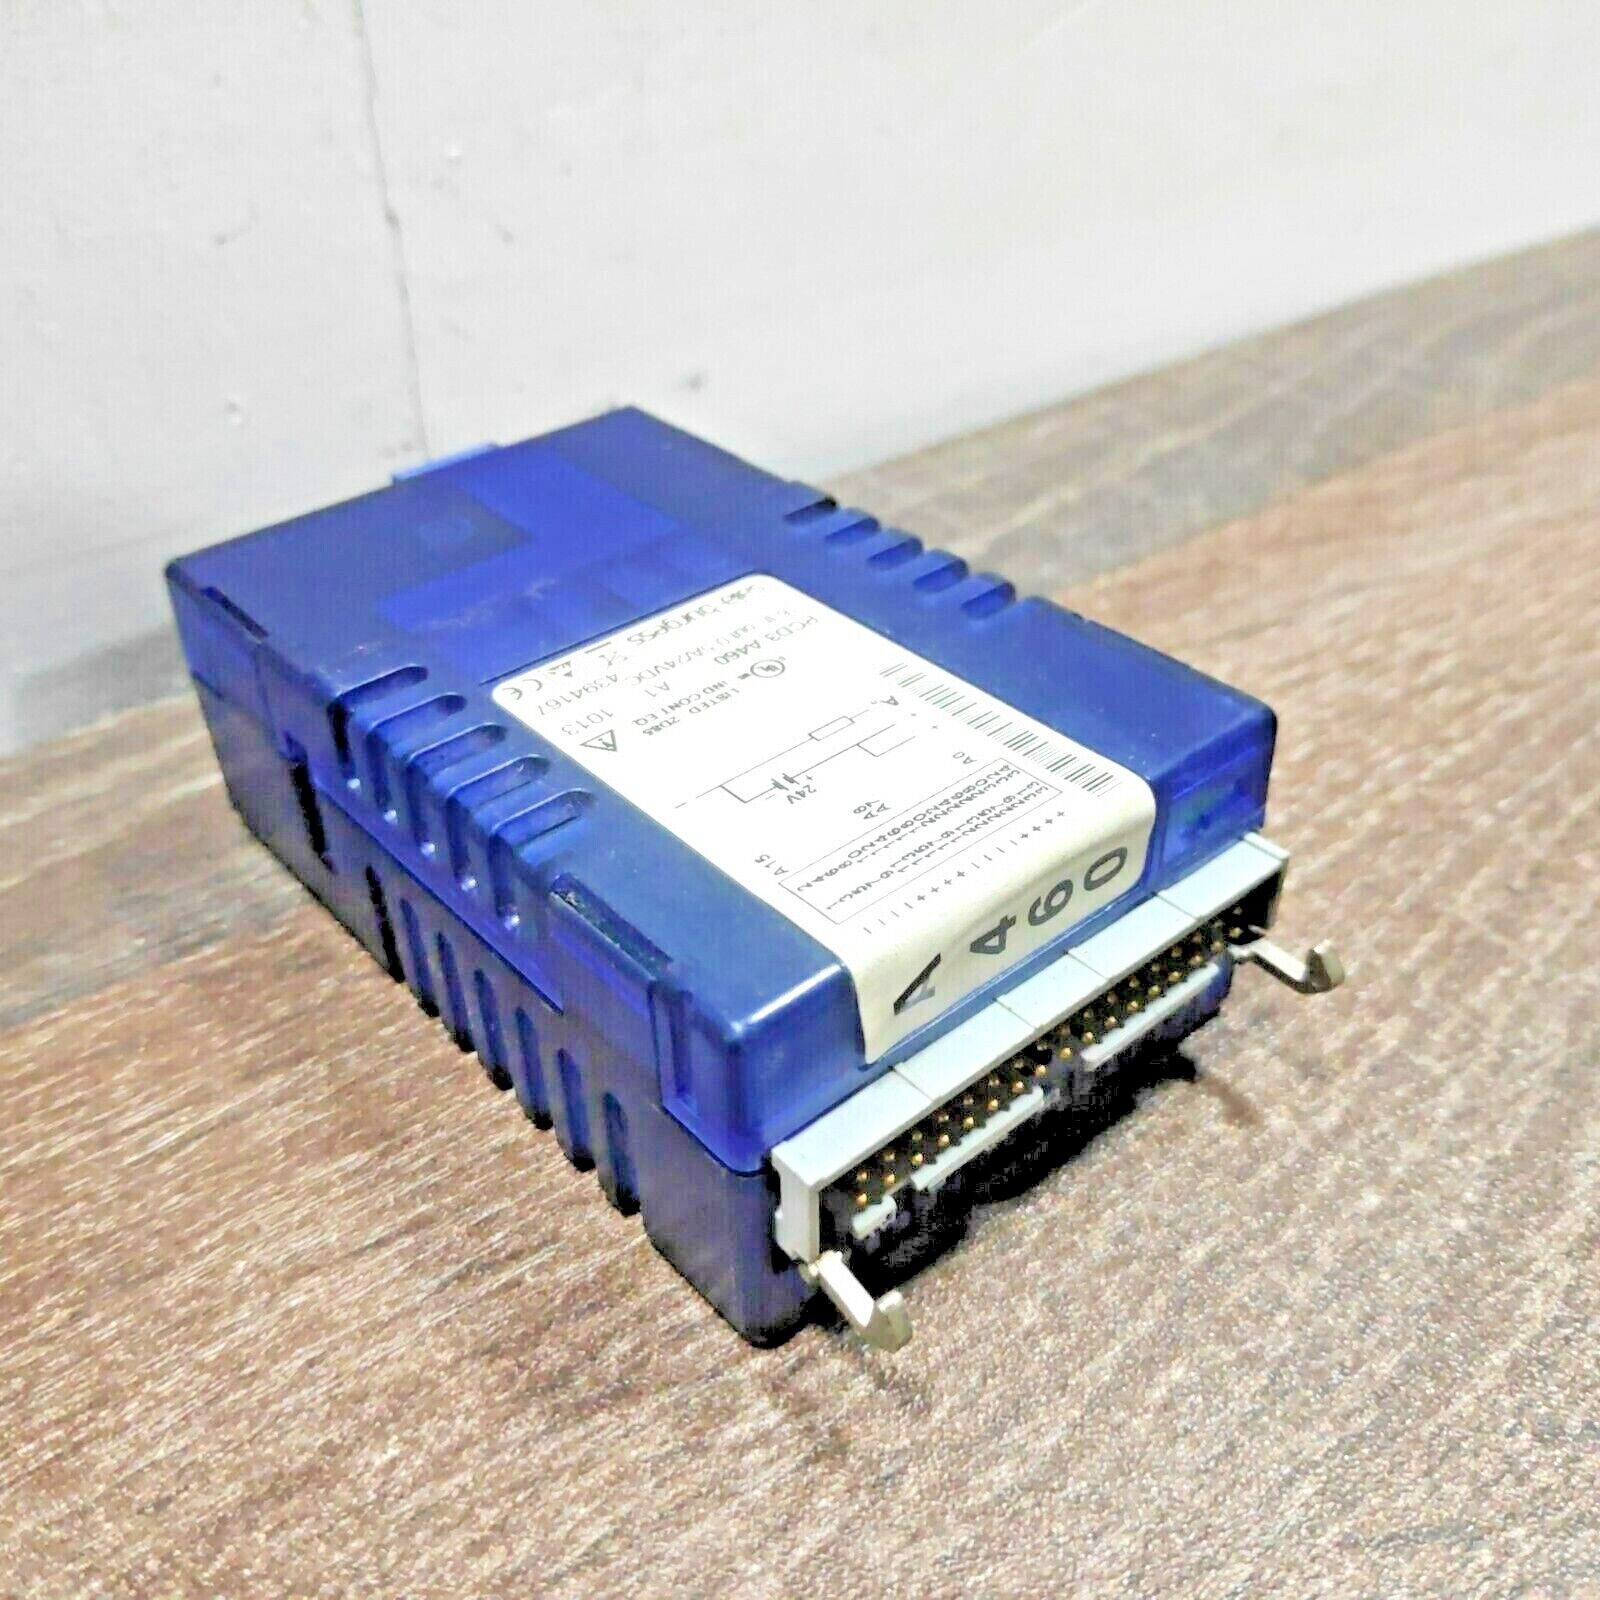 SAIA BURGESS PCD3.A460 DIGITAL OUTPUT MODULE 16 OUTPUT / TRANSISTOR 34 POLE RIBBON CABLE CONNECTOR 0.5 AMP 10-32 VDC FOR USE WITH PLUG-IN SYSTEM CABLE